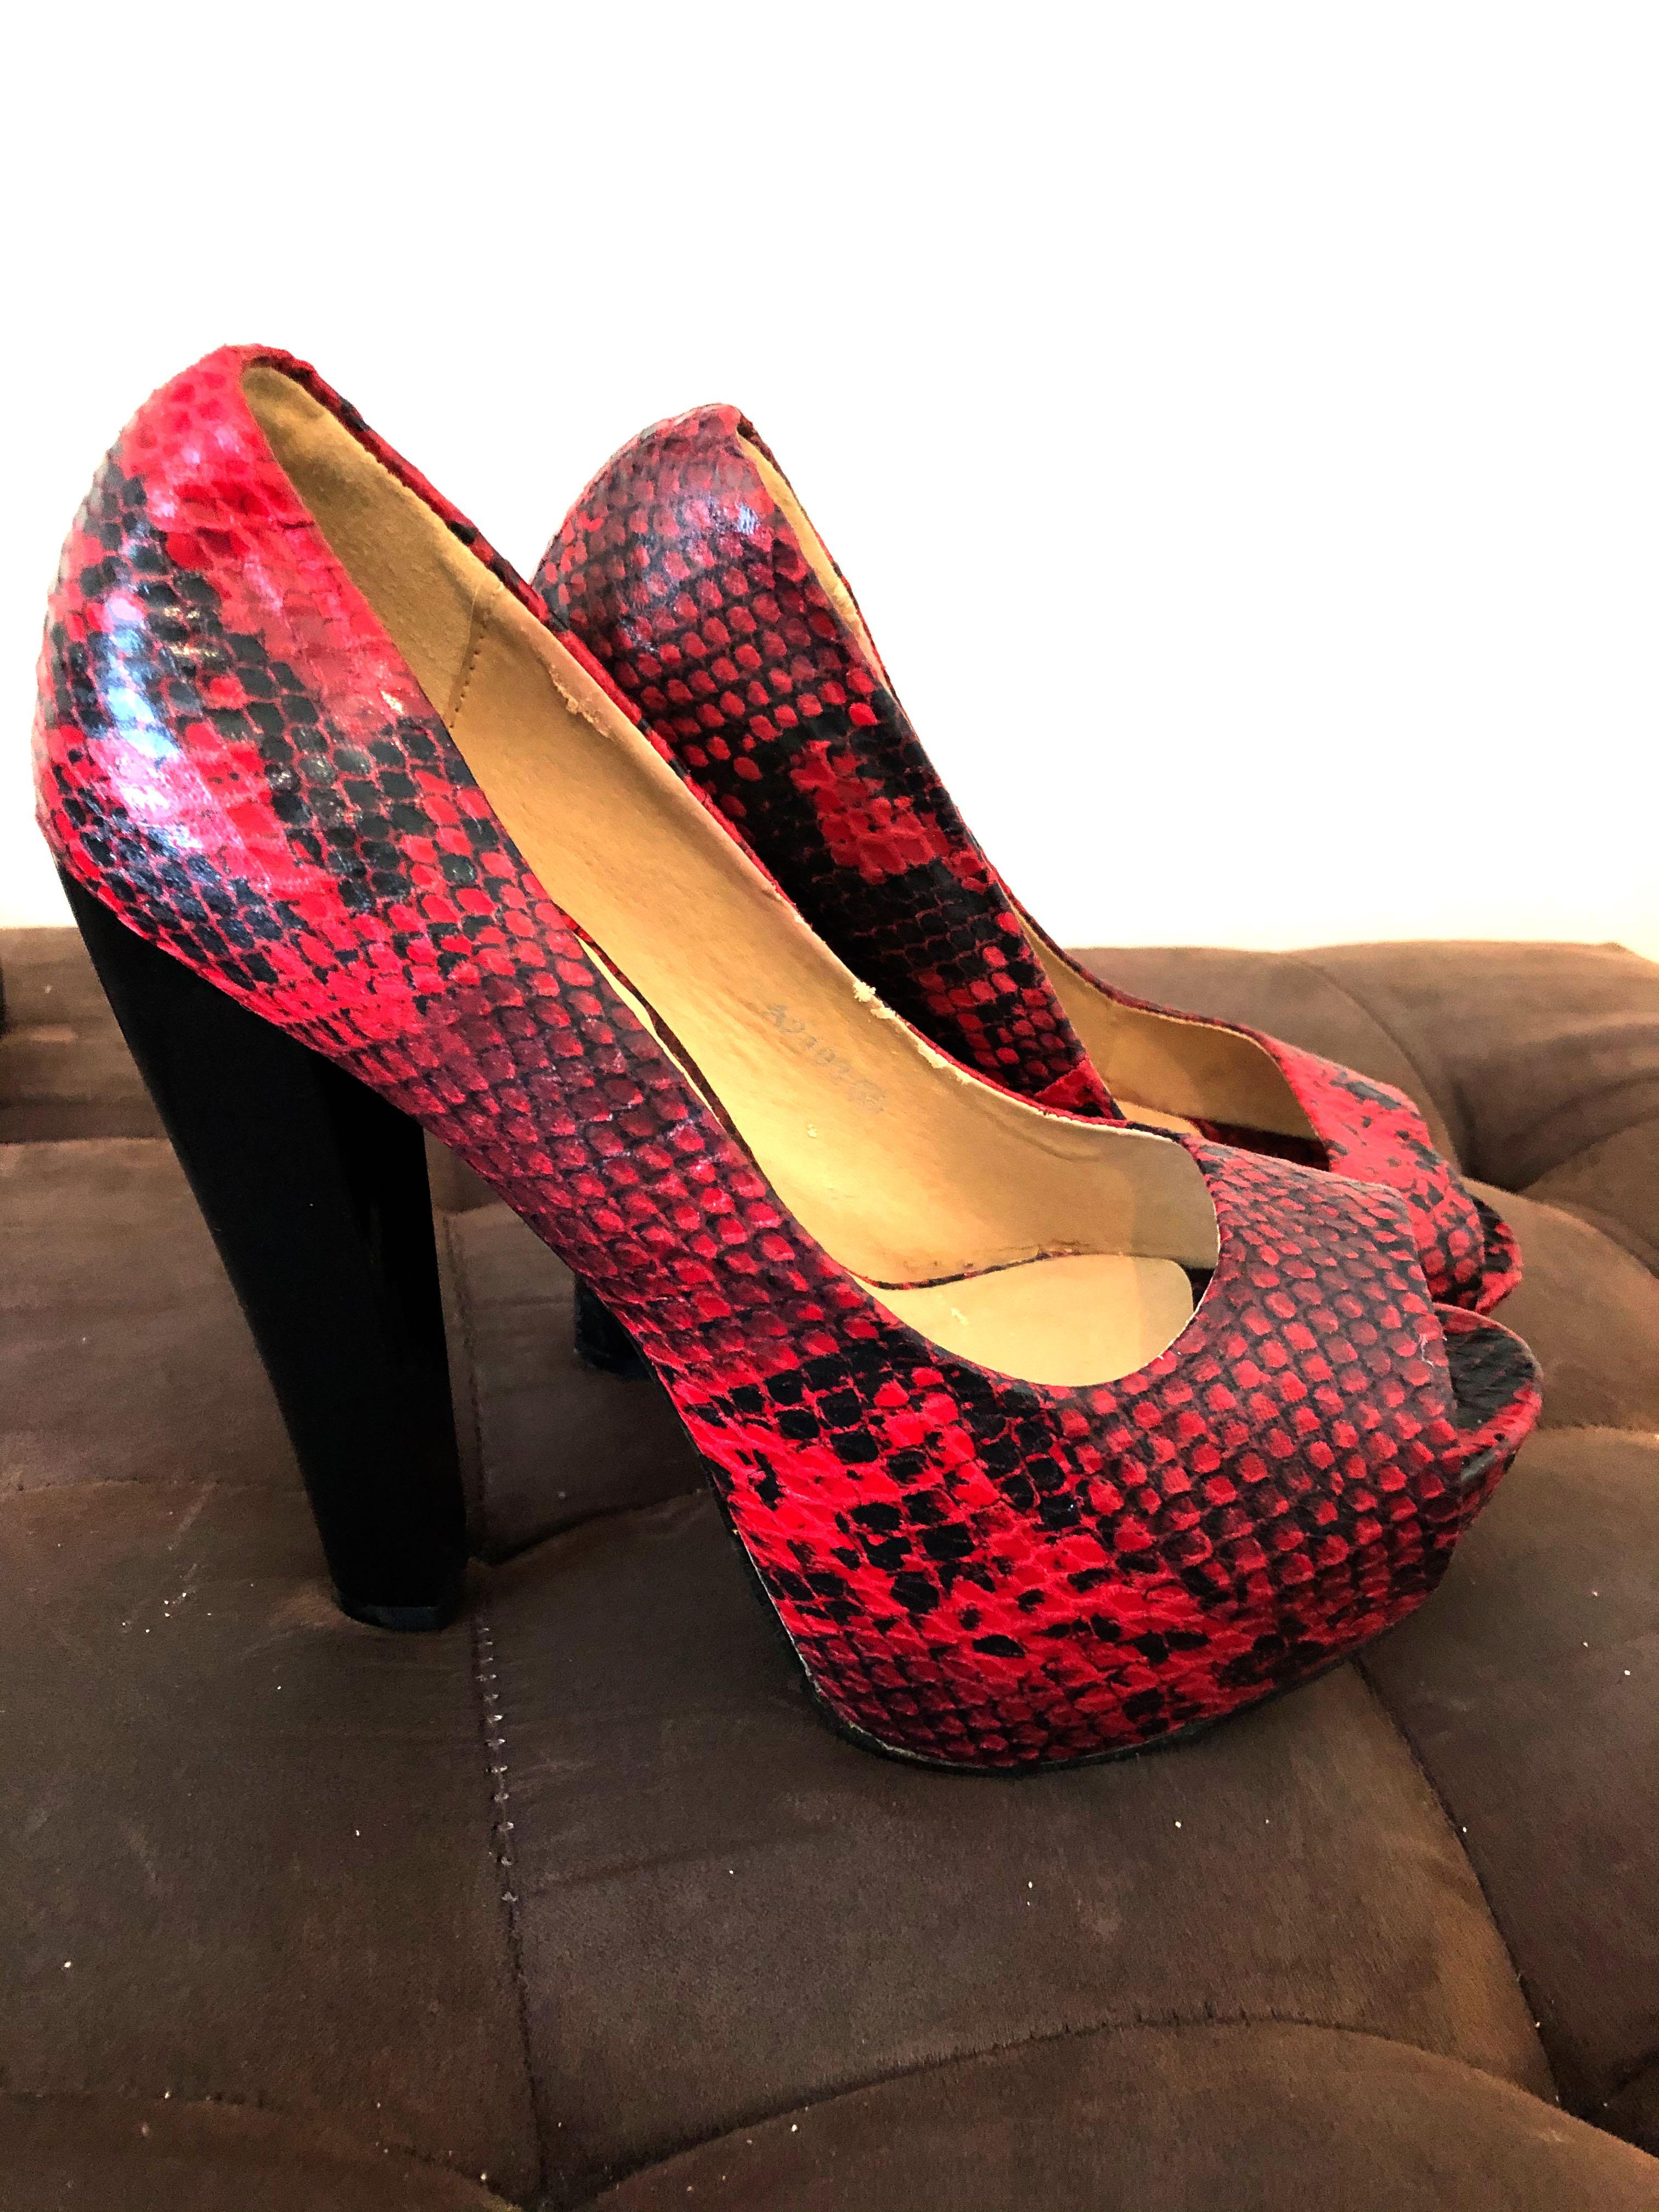 Pumps-Snake skin (Red and Black), Women 